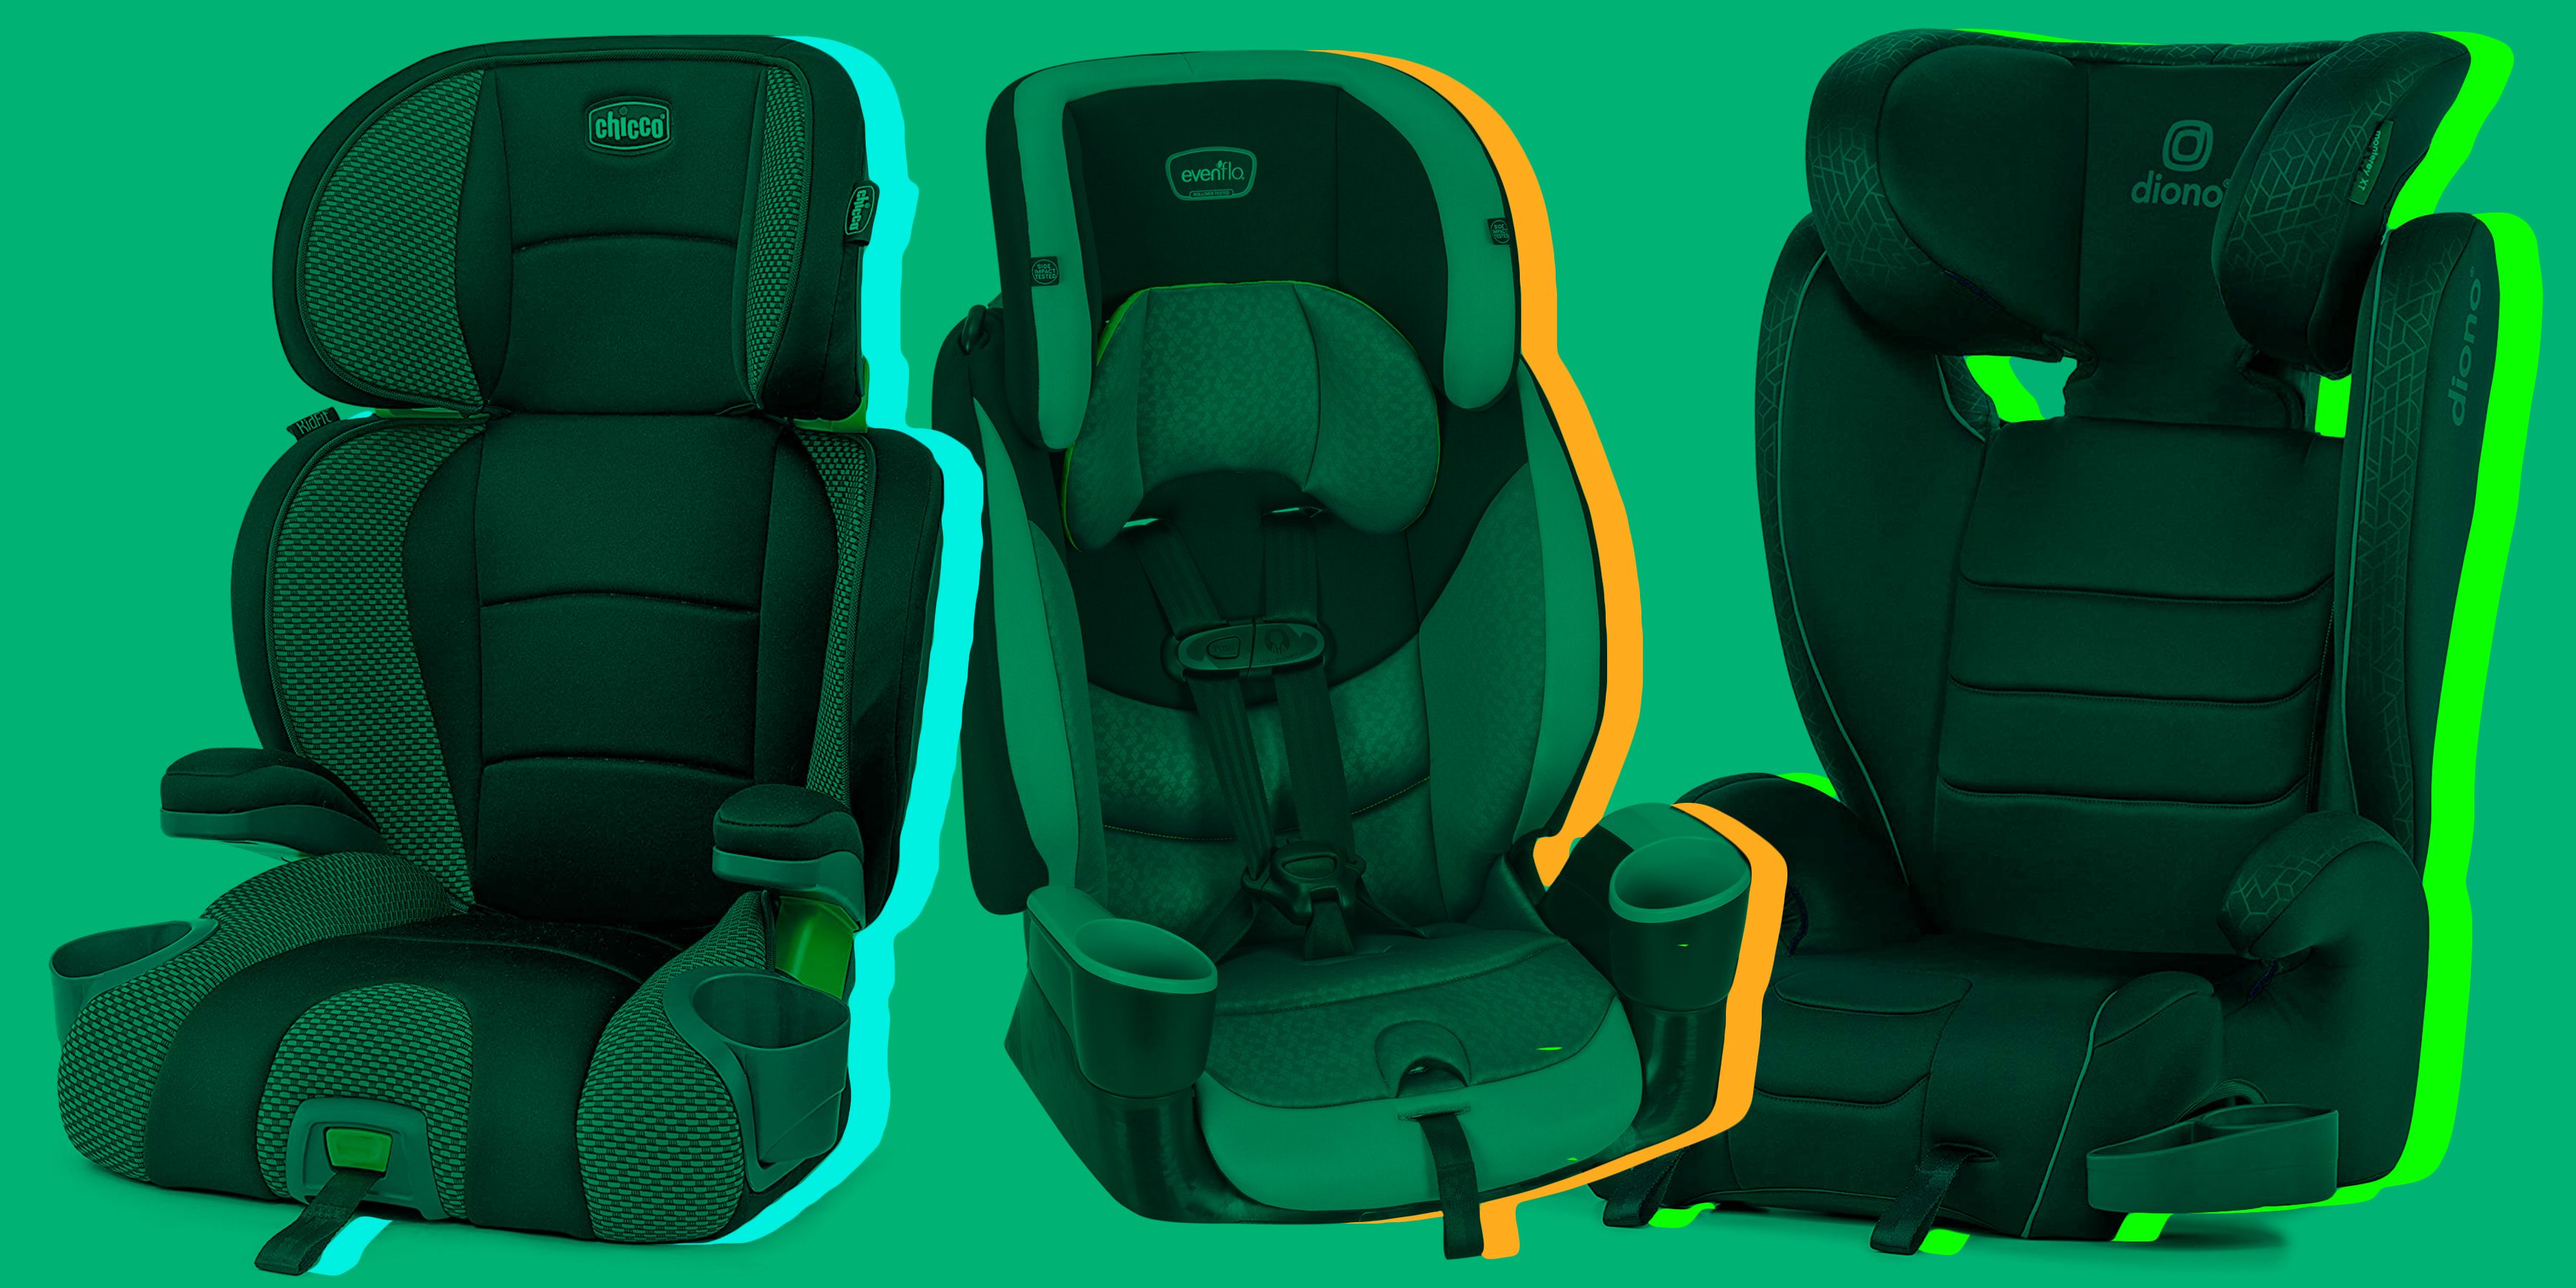 Tested: The Best Booster Car Seats, According to Experts